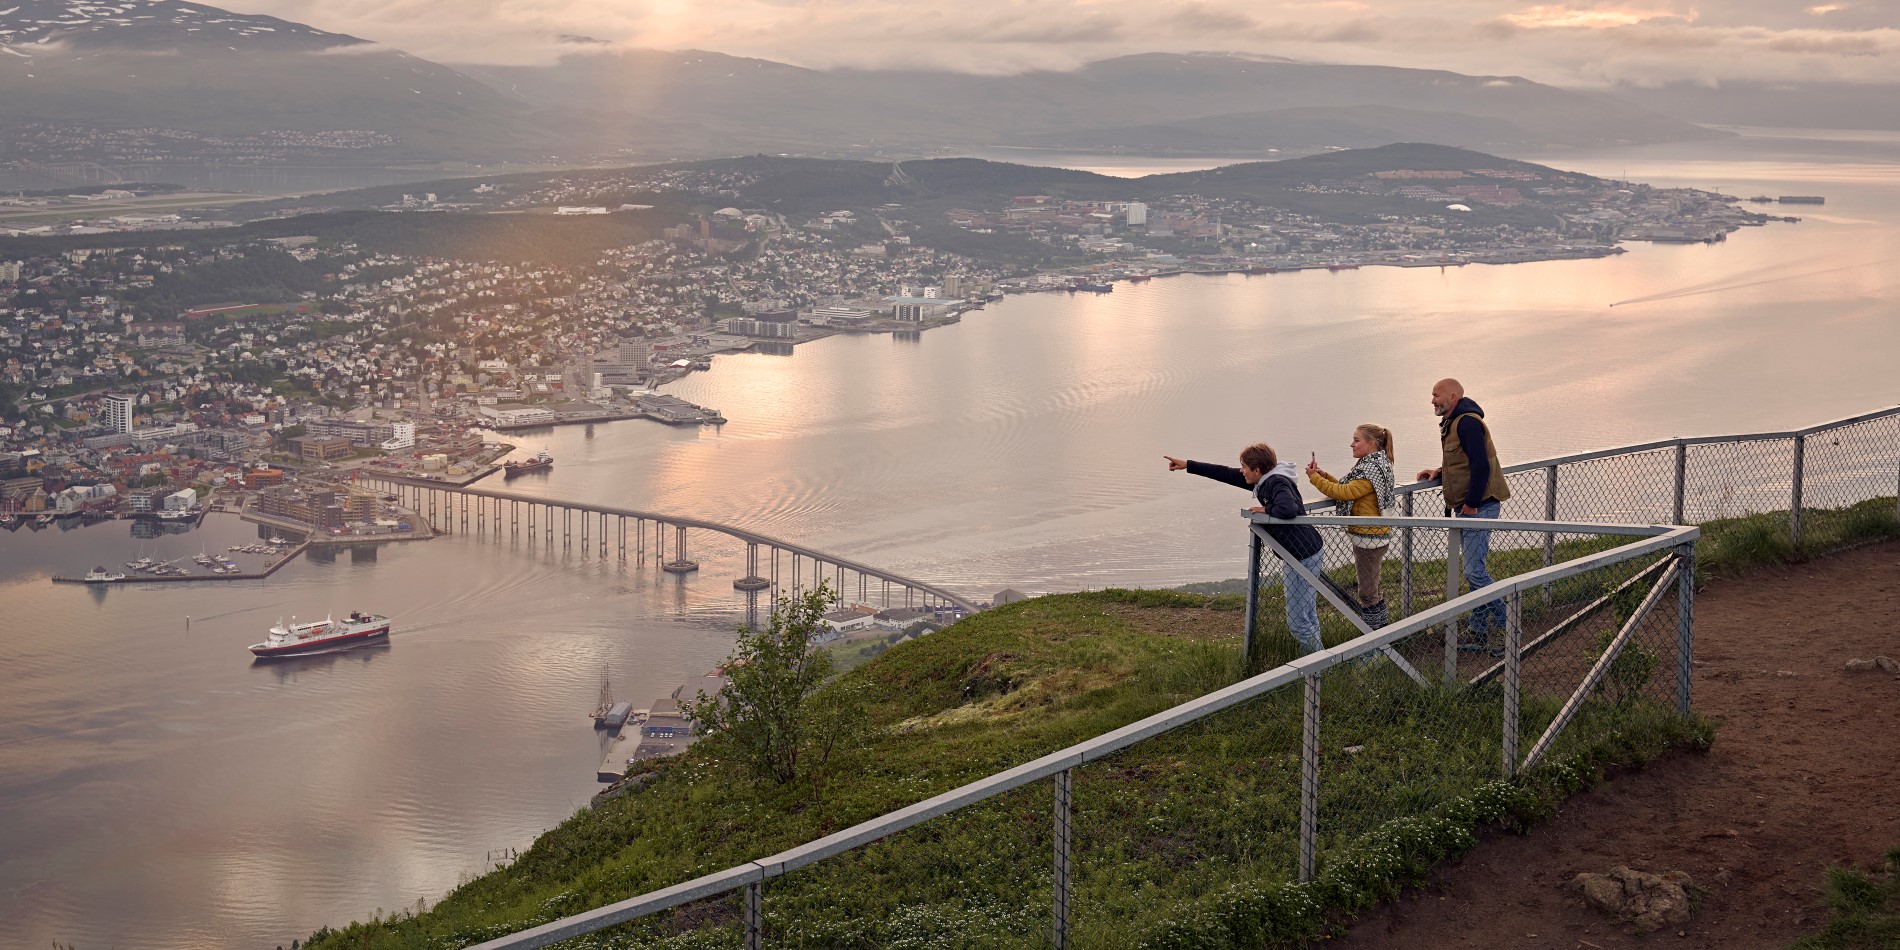 Three children standing behind the fence on top of the city mountain in Tromsø. They are overlooking Tromsø city.